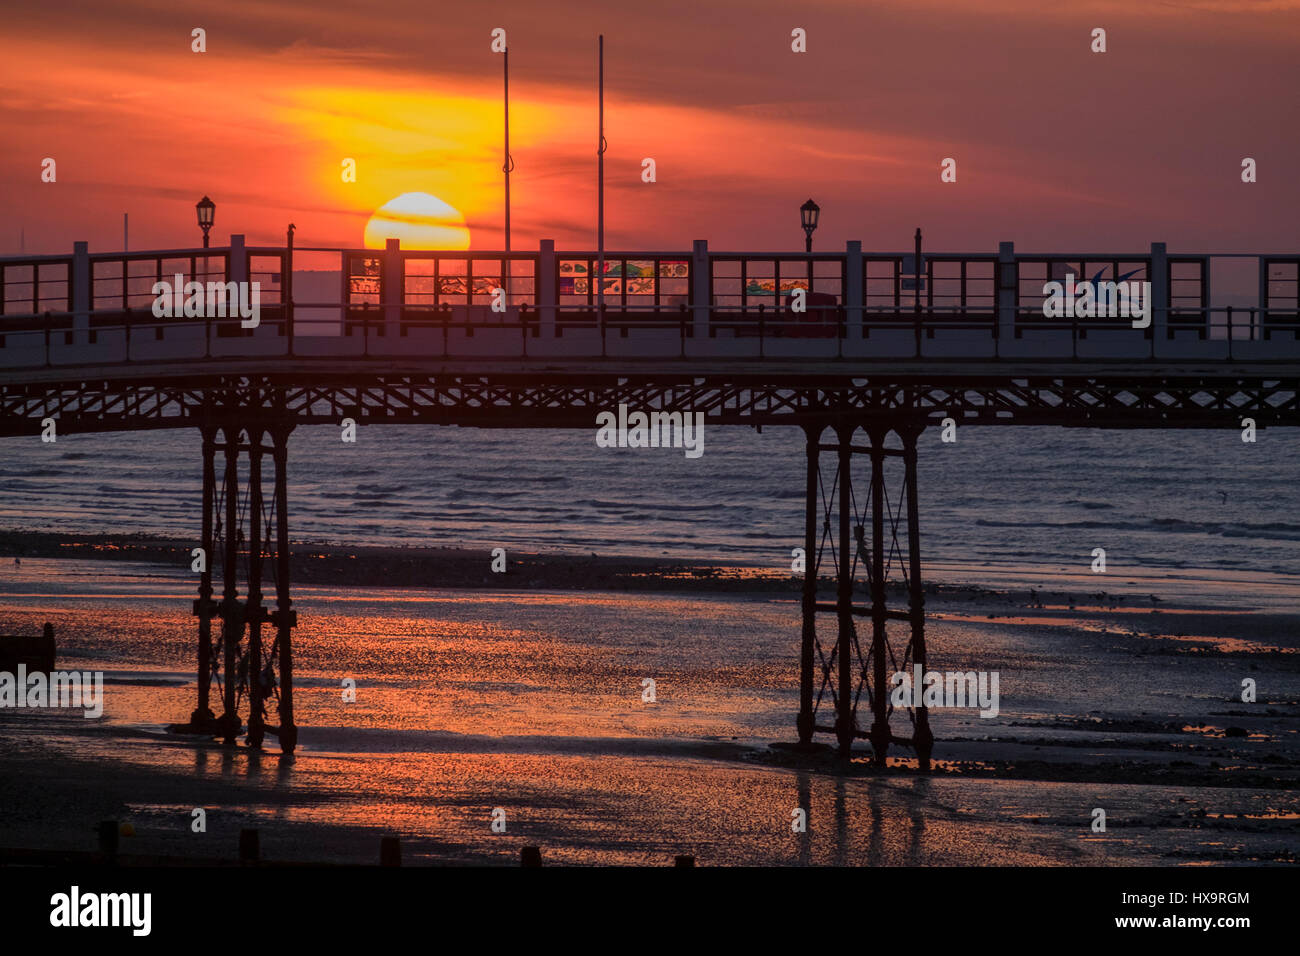 Worthing pier on the West Sussex coast in the UK showing beautiful ...